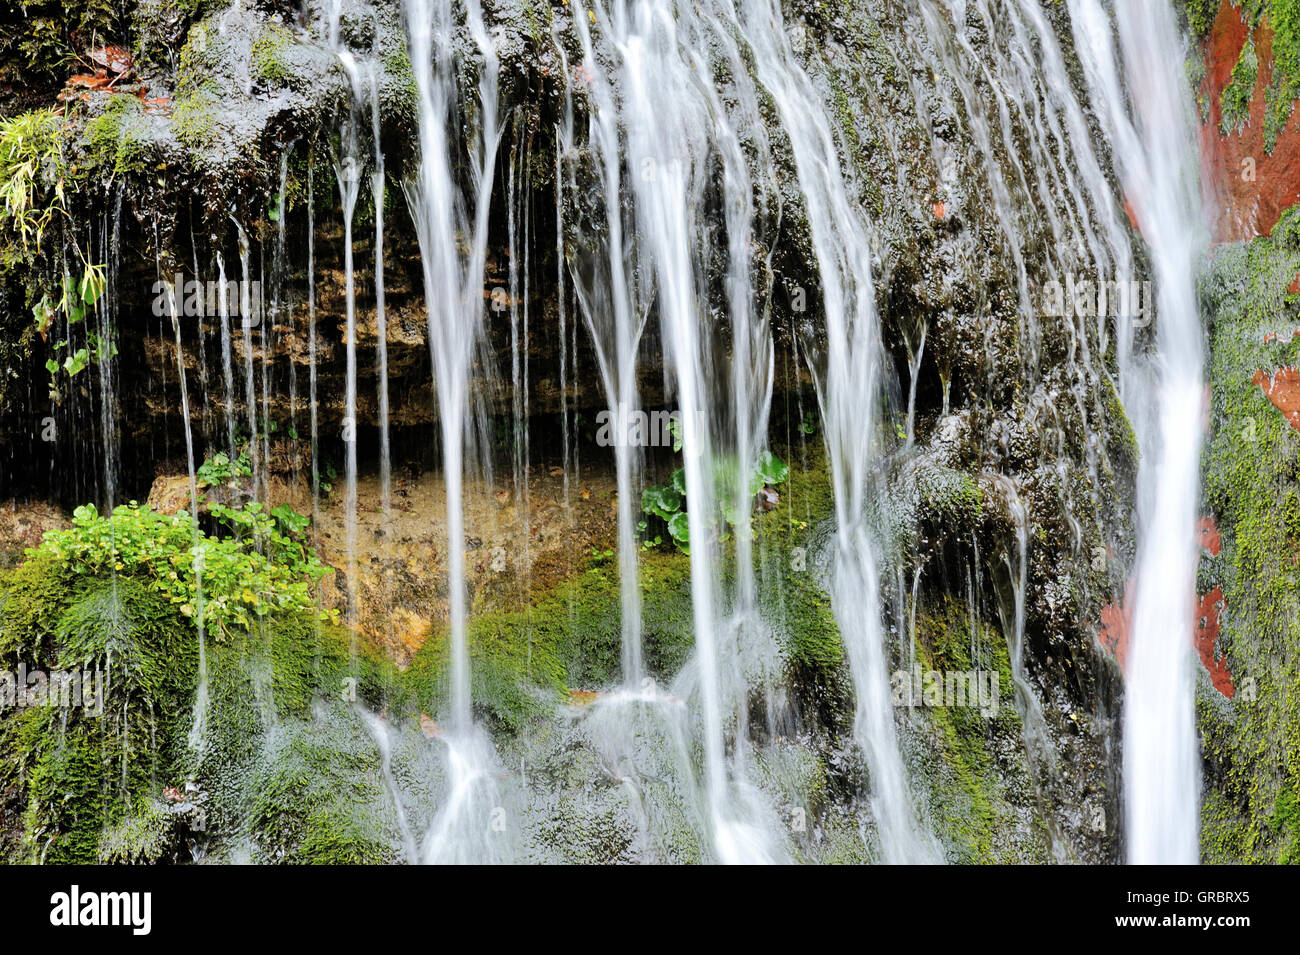 Time Exposure Of Small Waterfall In The Gorges Du Cians, French Alps, France Stock Photo